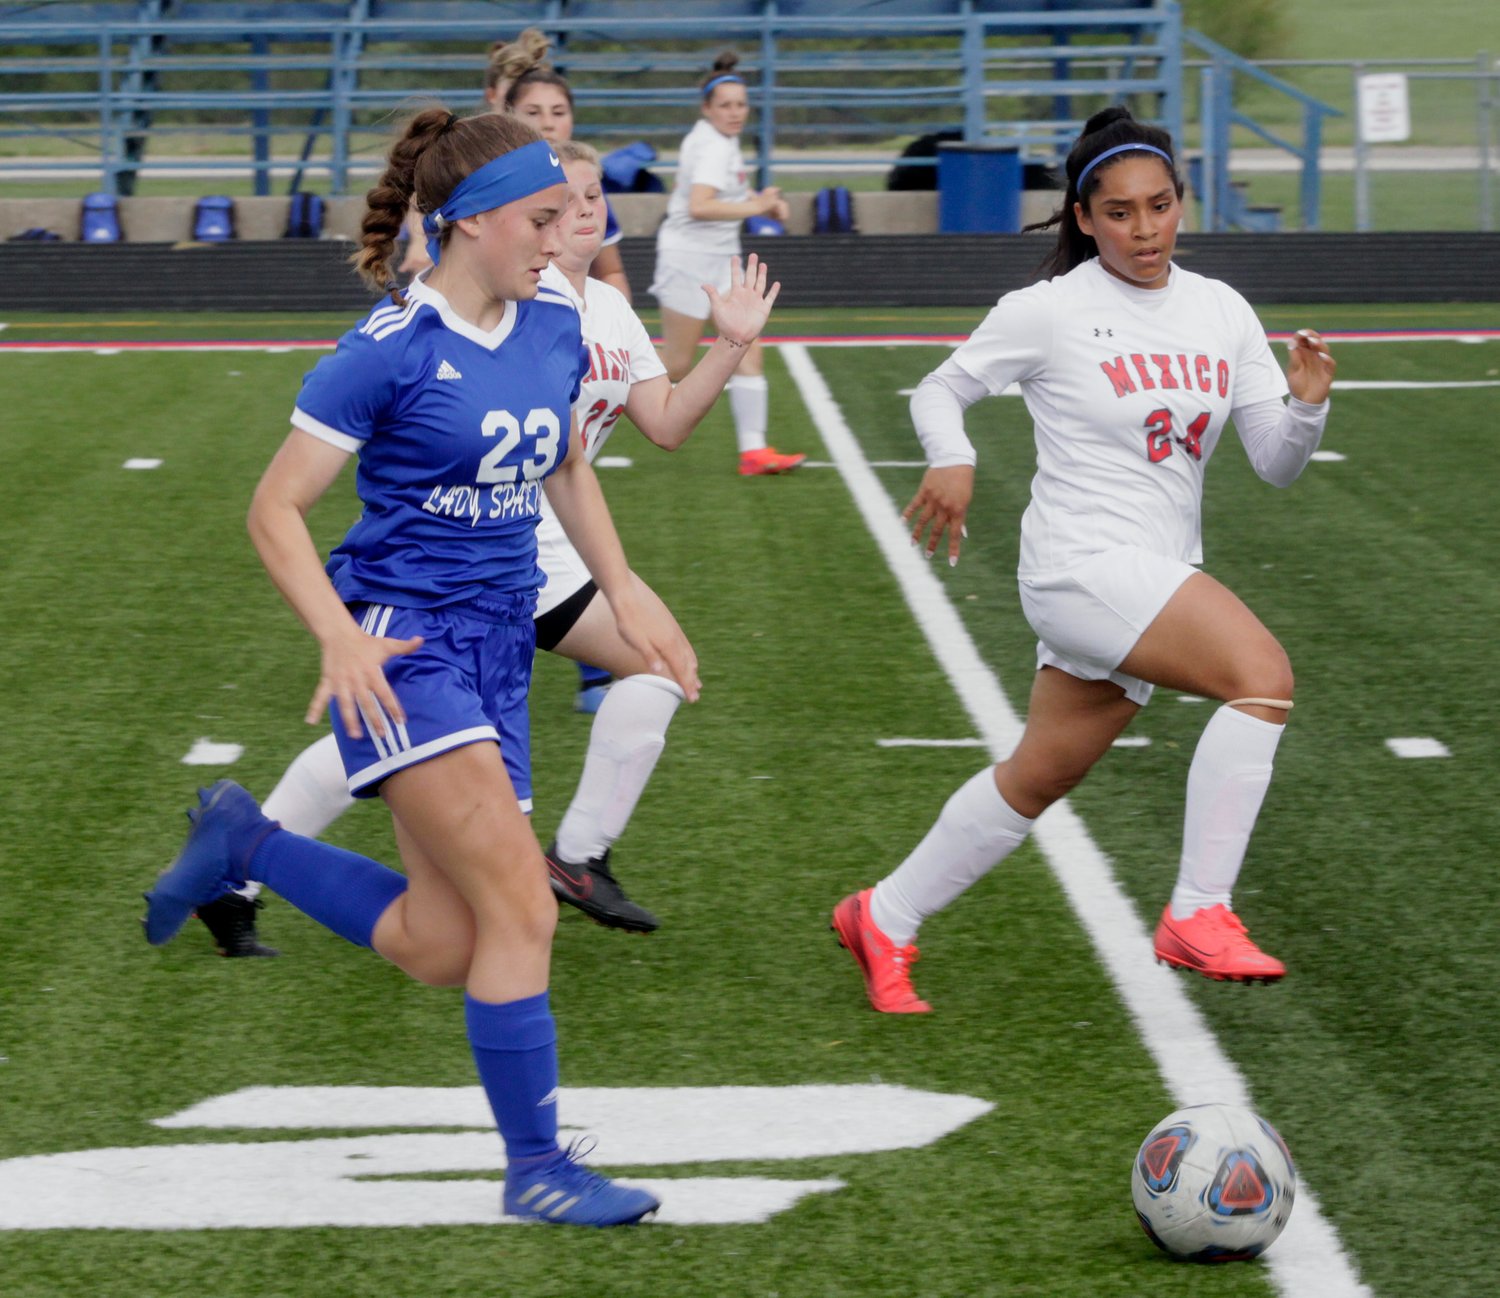 Moberly freshman Addie Holloway (#23) toes the soccer ball up the field Monday at Dr. Larry K. Noel Spartan Stadium while Mexico's Estrella Lopez (#24) runs alongside her. The Lady Spartans lost its home conference game 1-0 to Mexico.